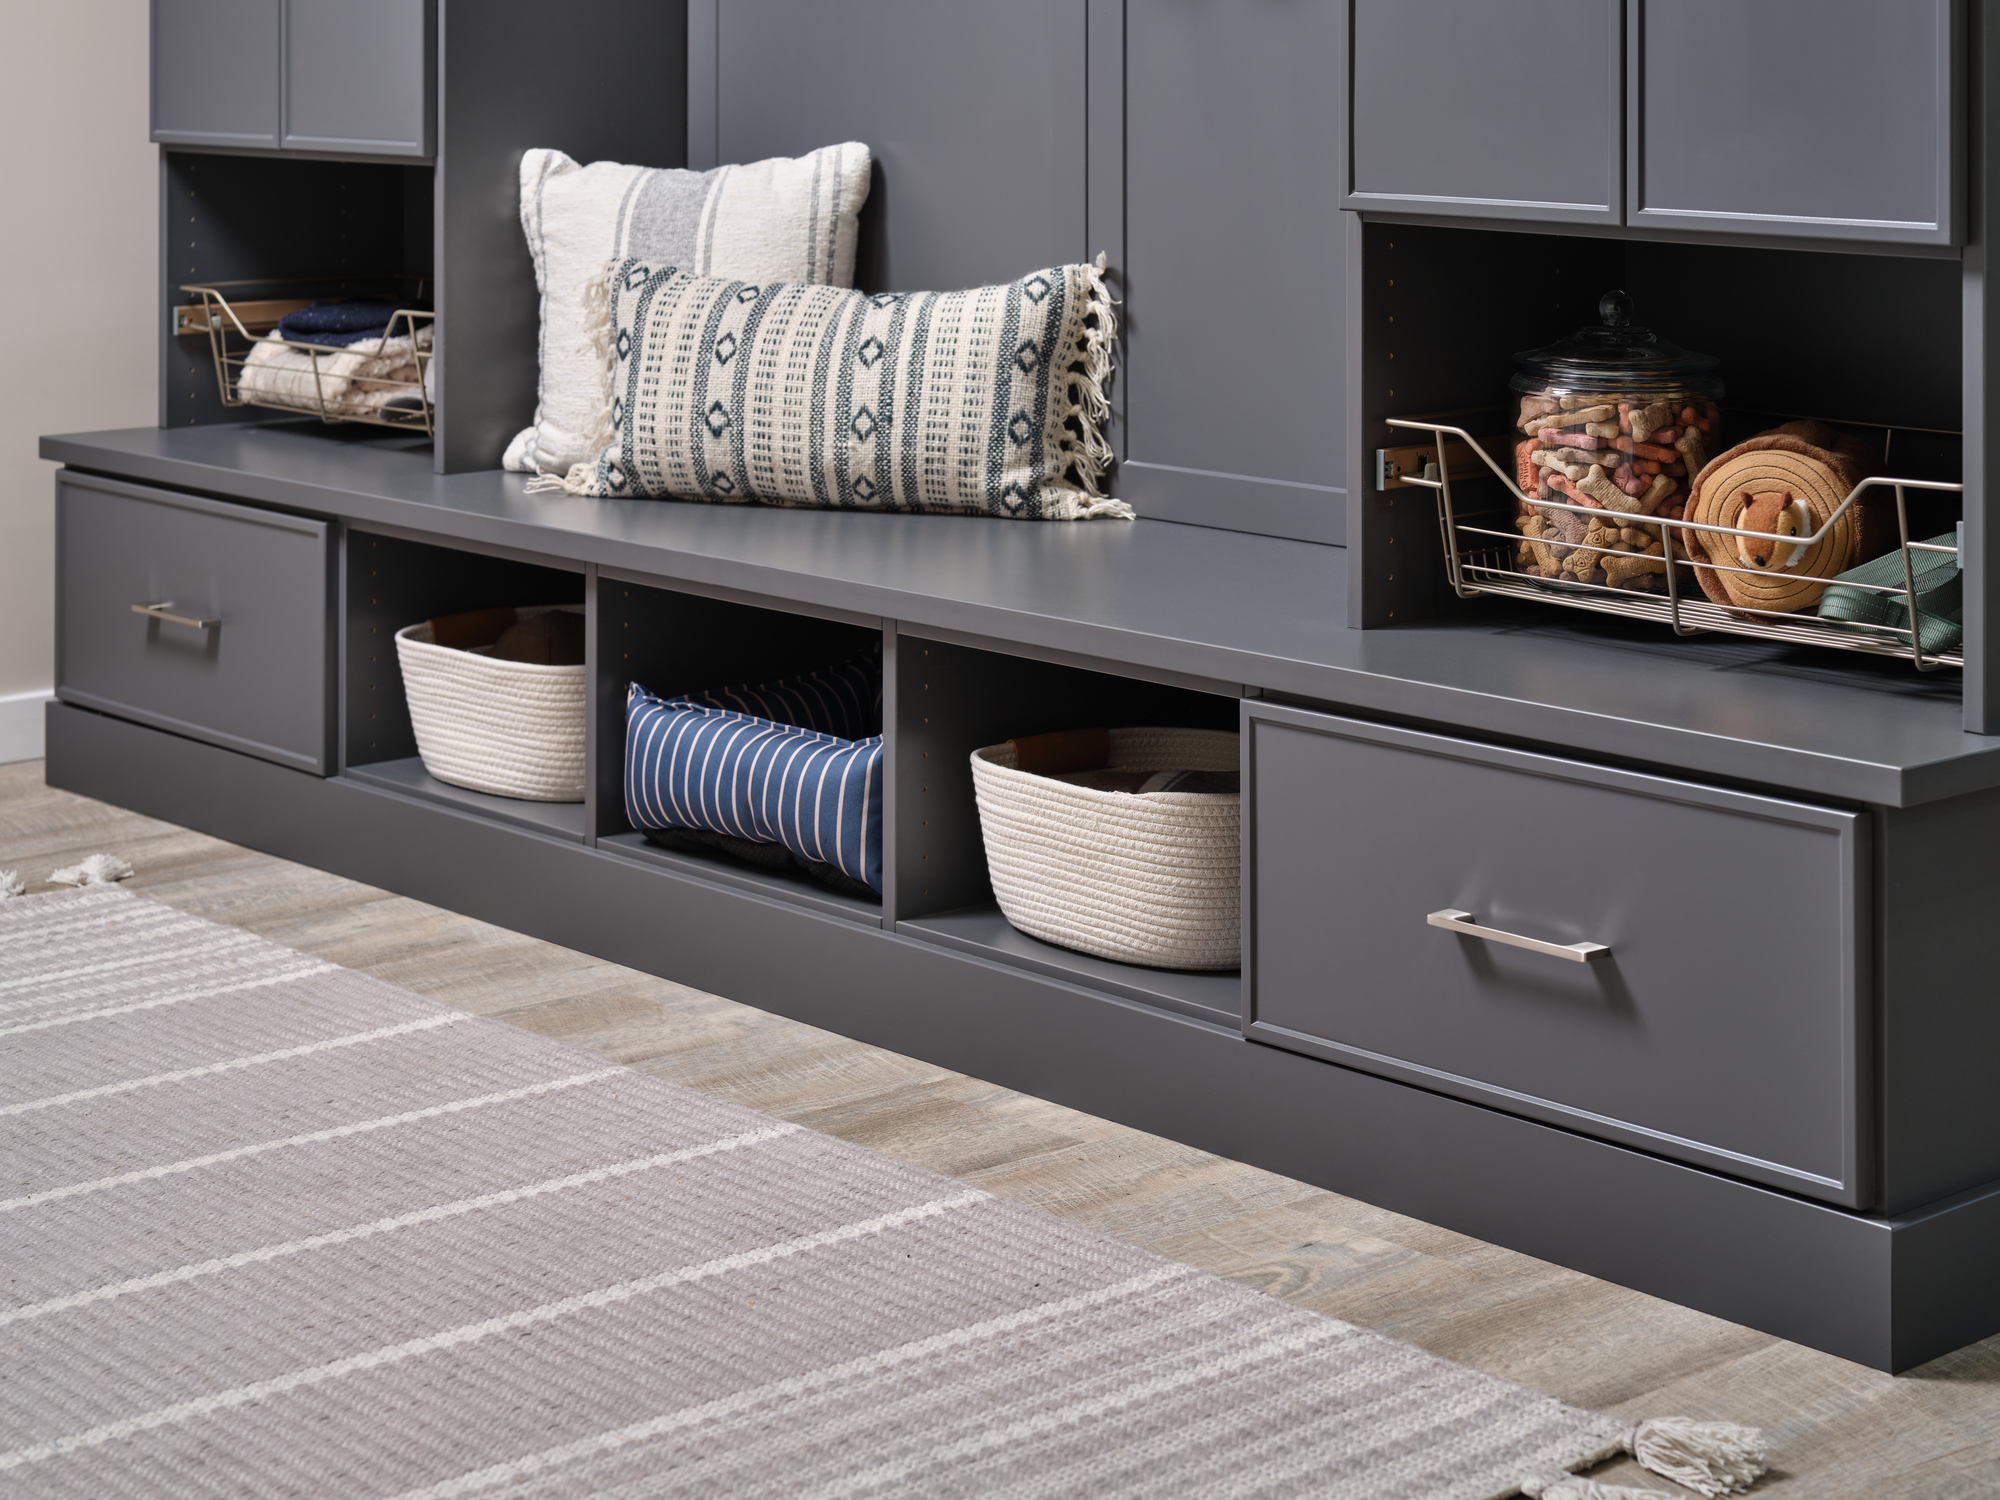 Mudroom bench and storage from Inspired Closets